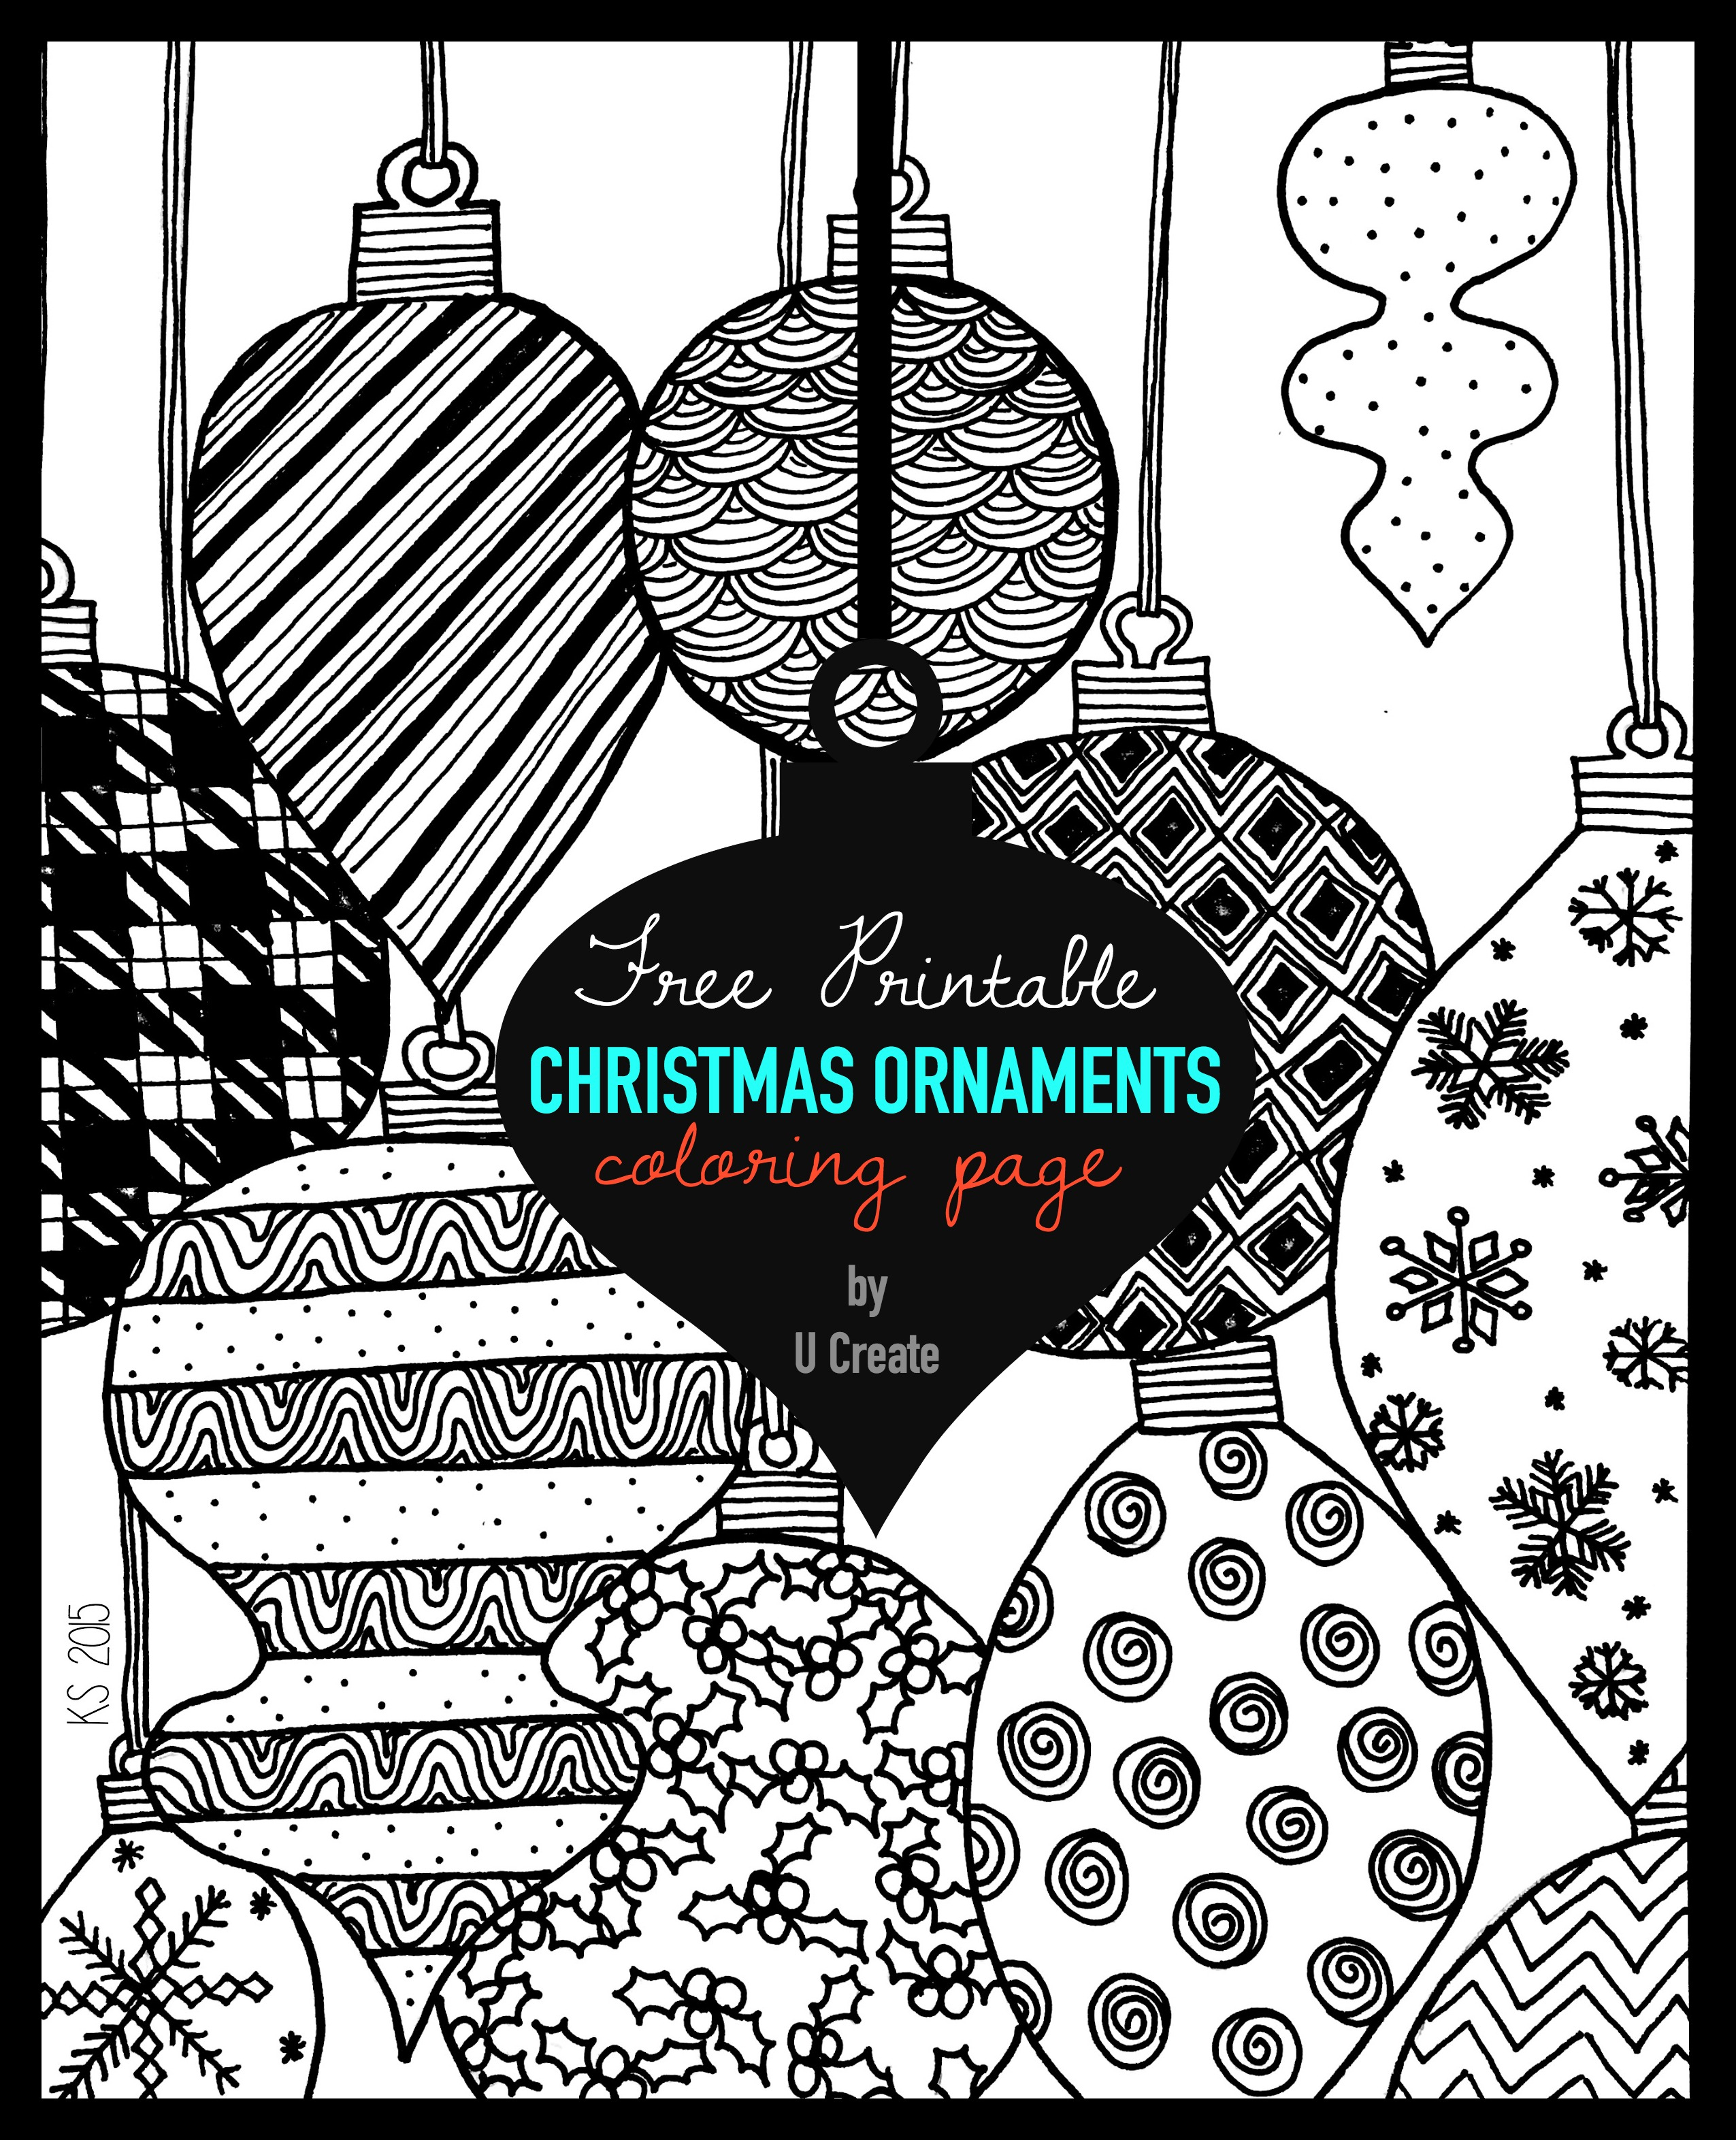 Christmas Ornaments Adult Coloring Page - U Create - Free Printable Christmas Tree Ornaments Coloring Pages